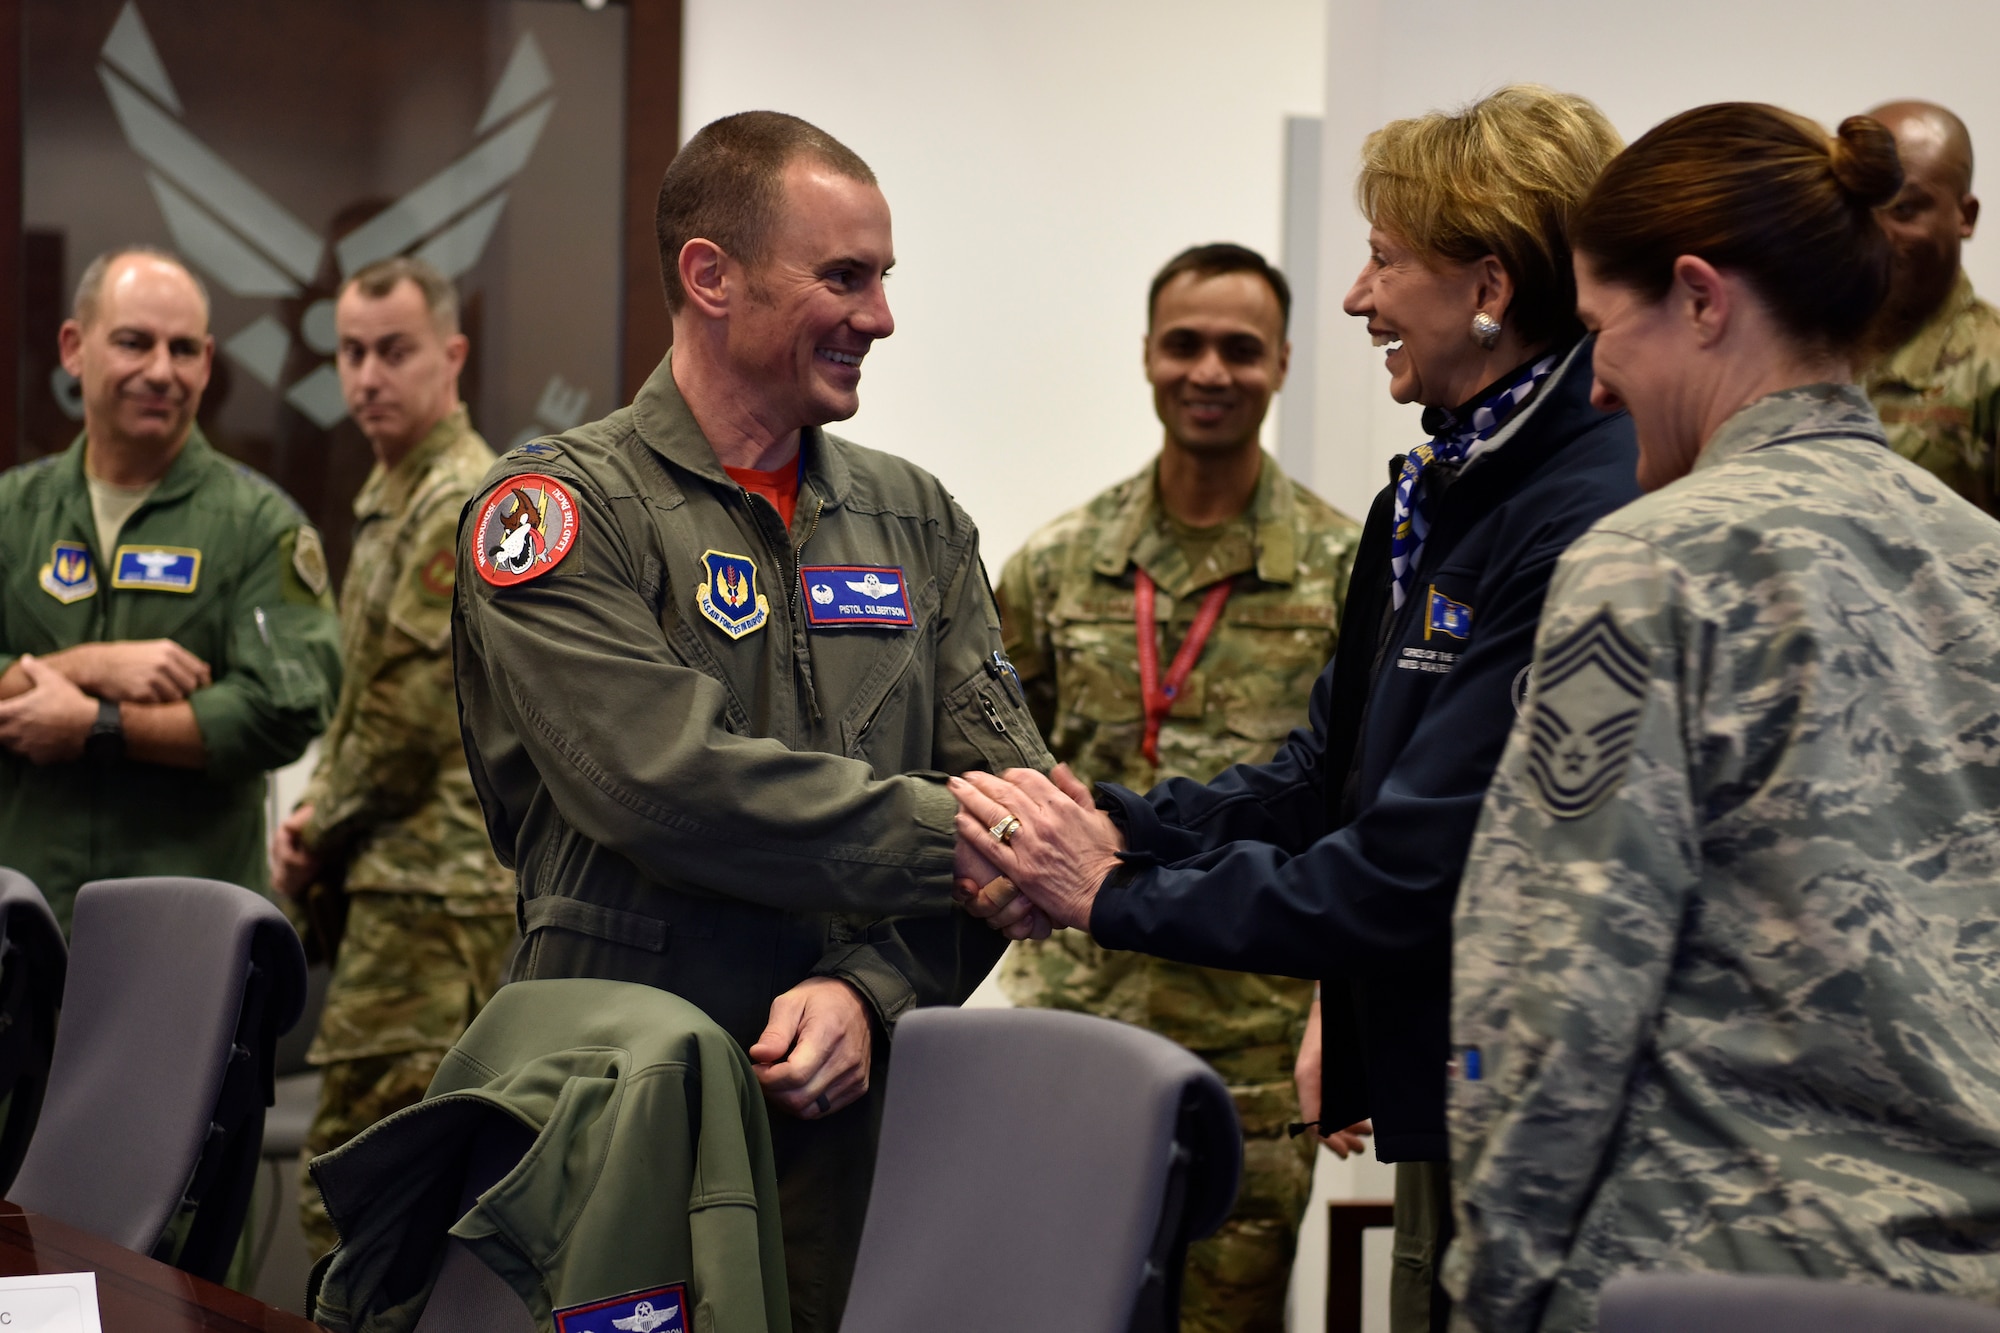 U.S. Air Force Col. Cary Culbertson, 603rd Air and Space Operations Center commander, greets Secretary of the Air Force Barbara M. Barrett, during a tour of the AOC at Ramstein Air Base, Germany, Nov. 22, 2019.